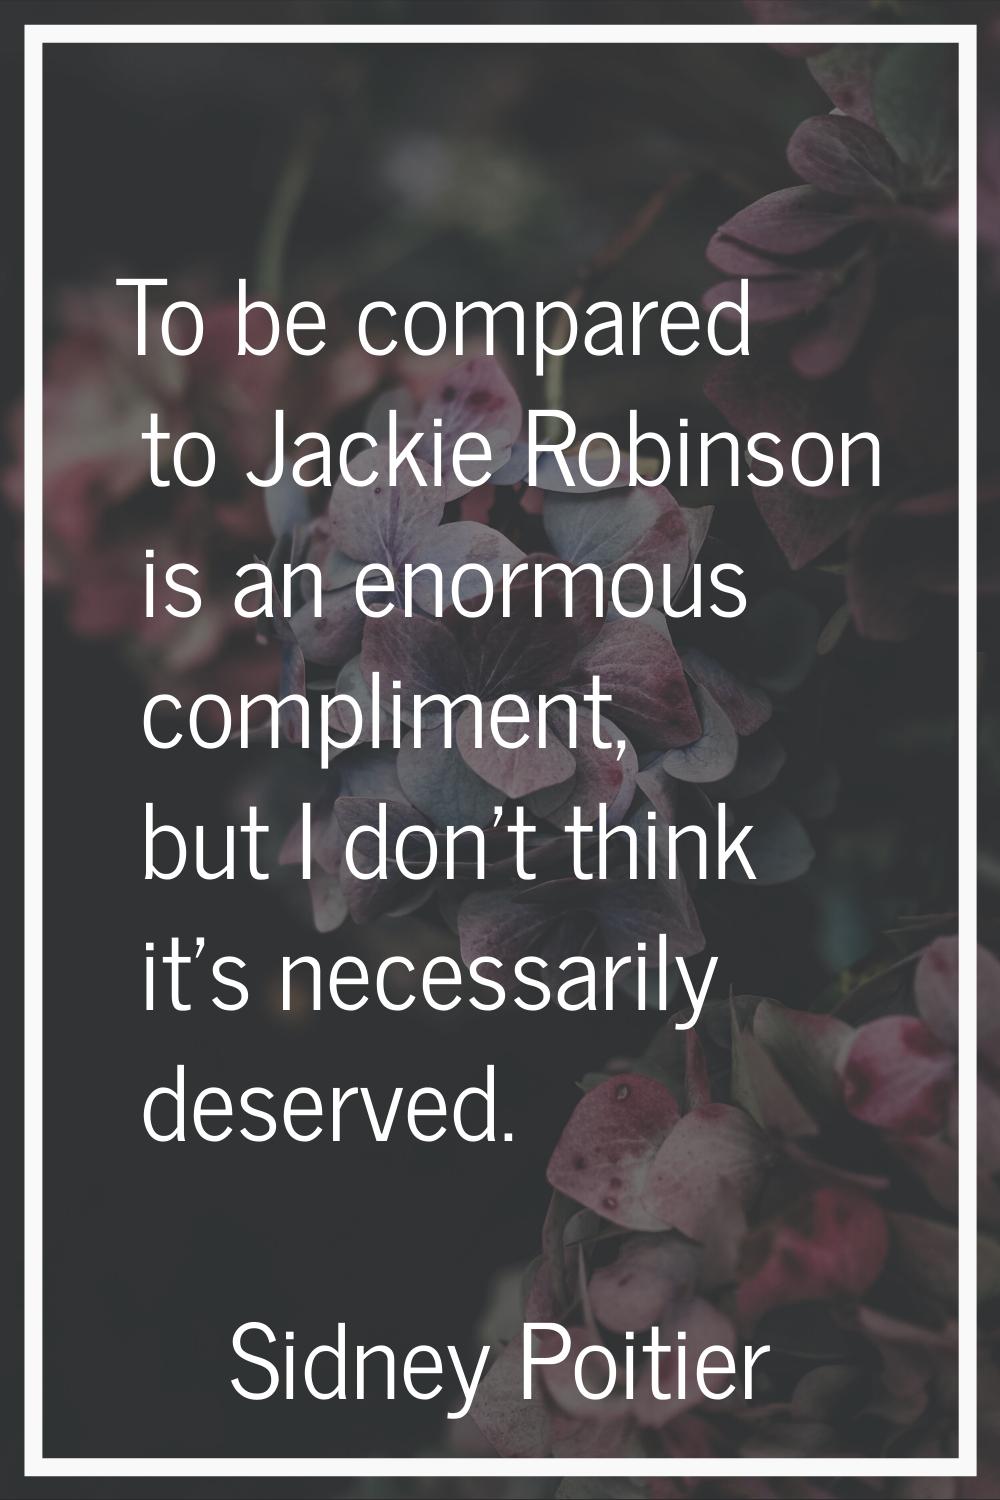 To be compared to Jackie Robinson is an enormous compliment, but I don't think it's necessarily des